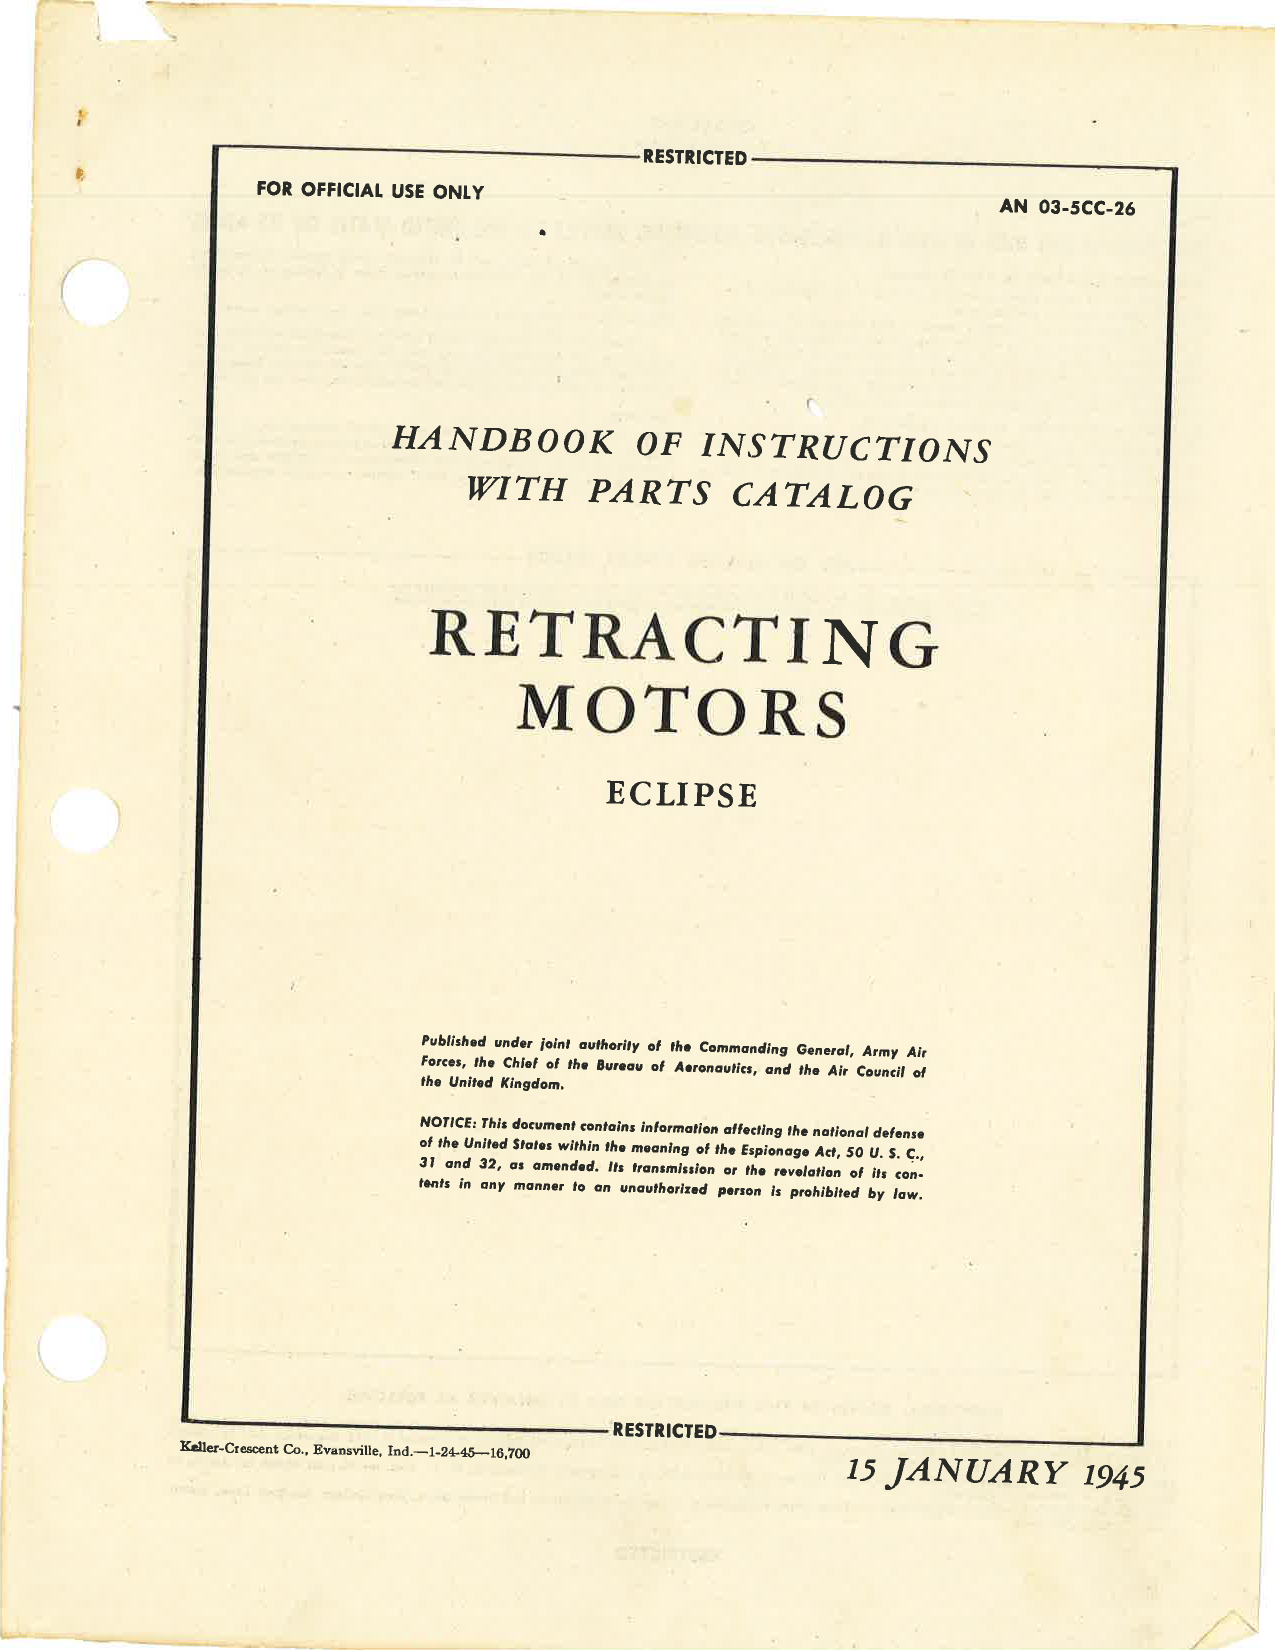 Sample page 1 from AirCorps Library document: Handbook of Instructions with Parts Catalog for Retracting Motors